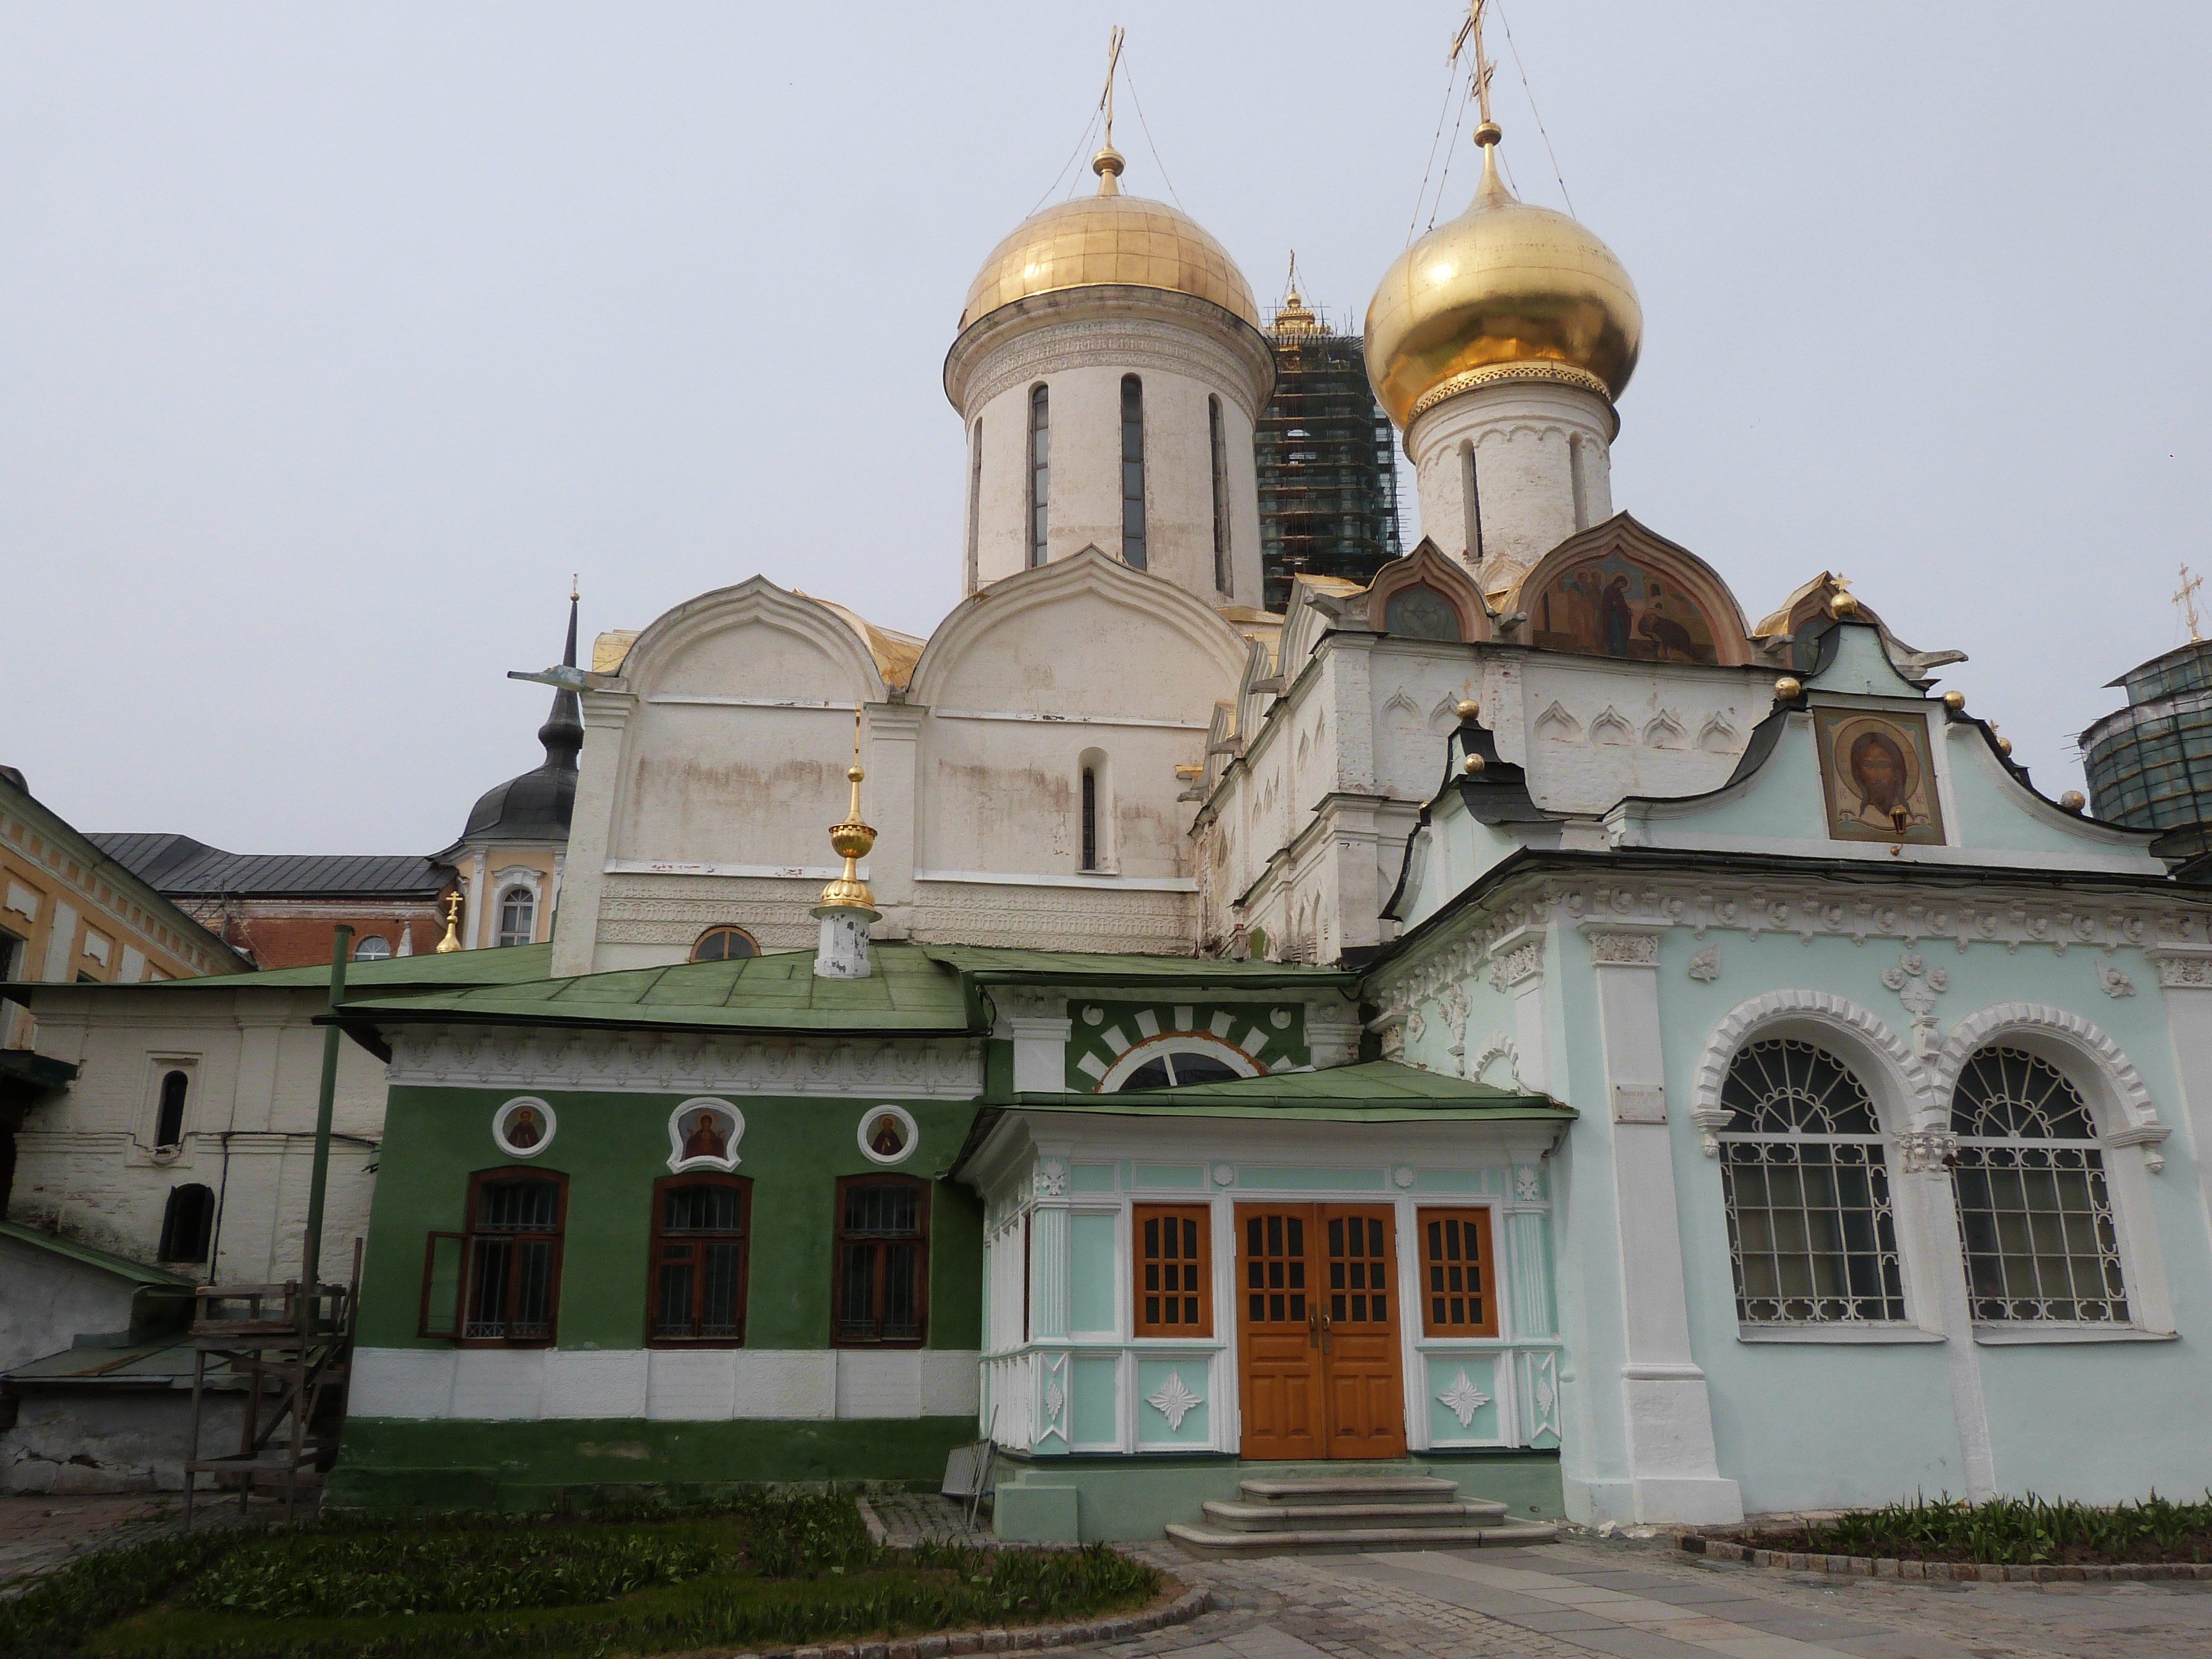 One of the churches in the Sergiev Posad kremlin